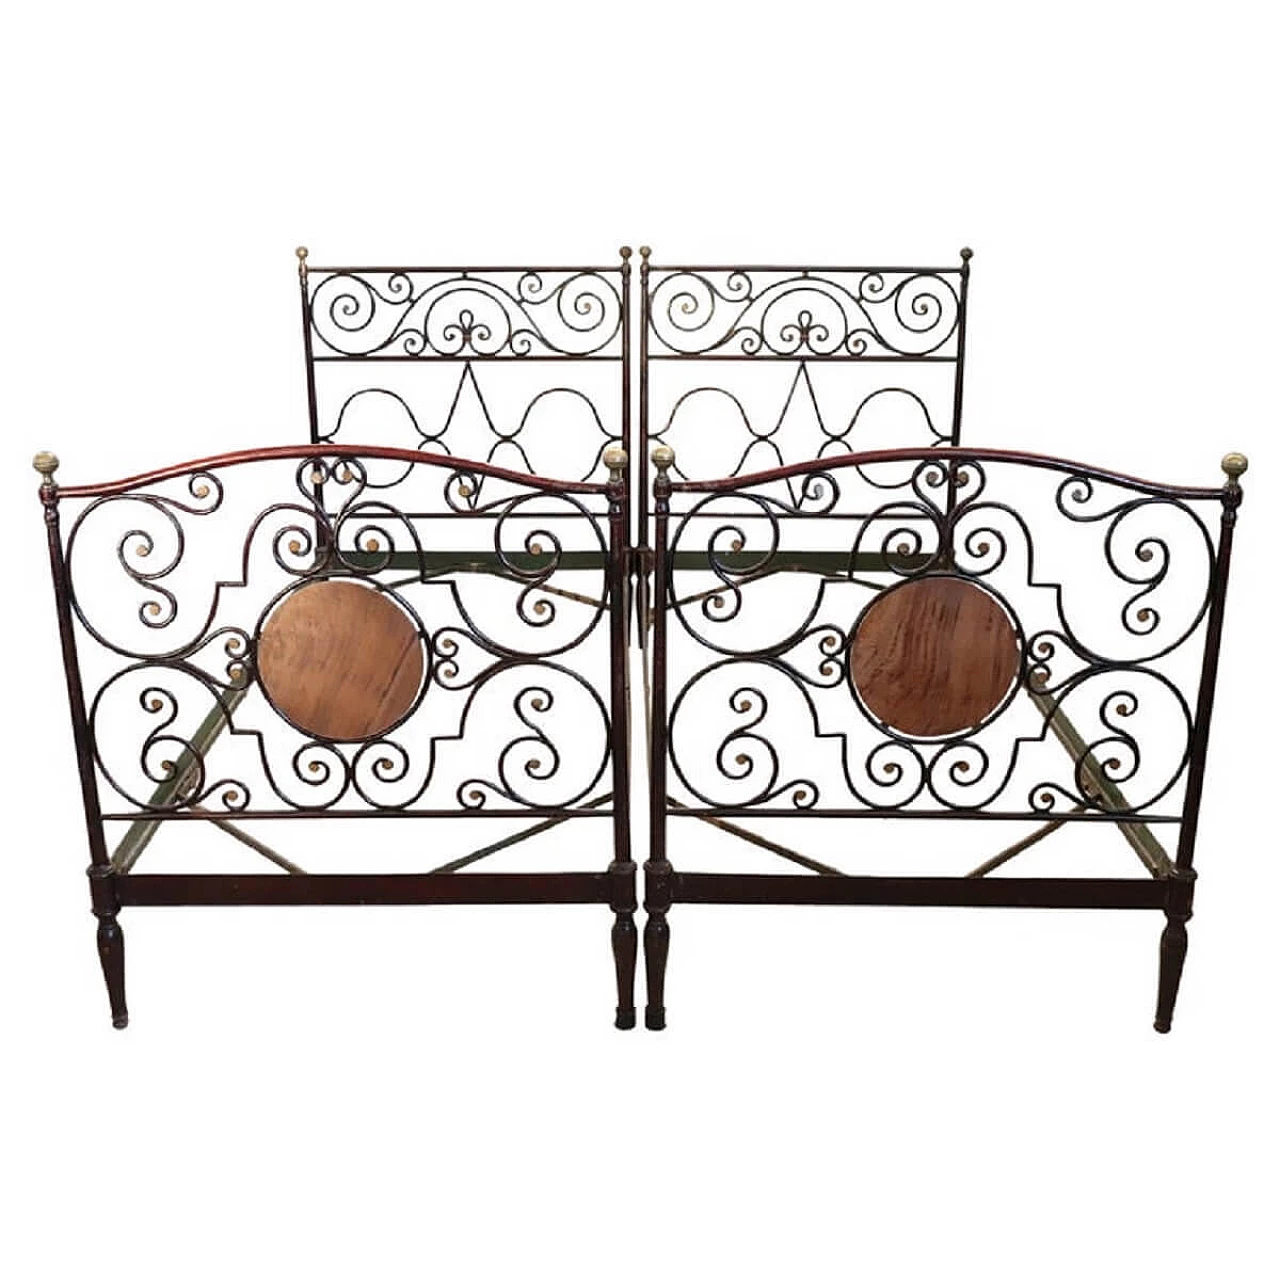 Pair of wrought iron single beds, 19th century 1